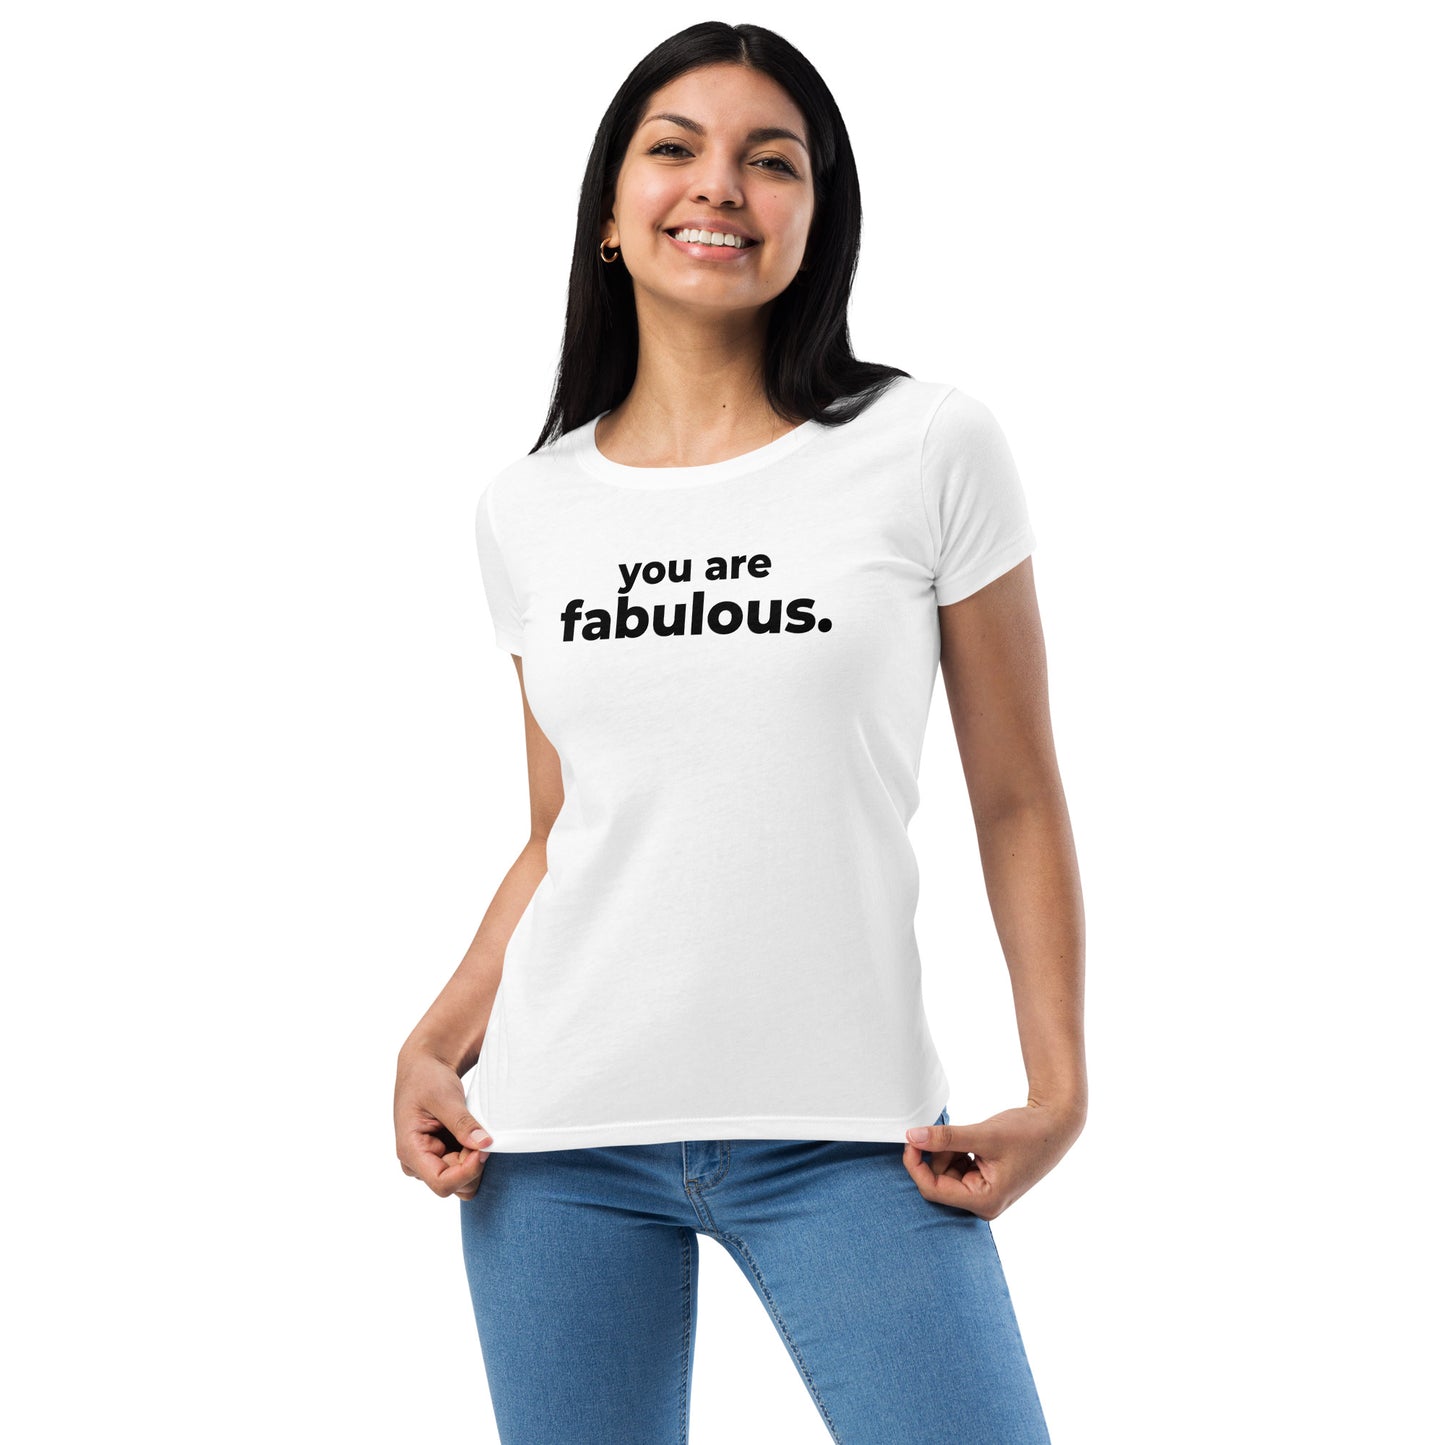 YOU ARE FABULOUS - Women’s fitted t-shirt